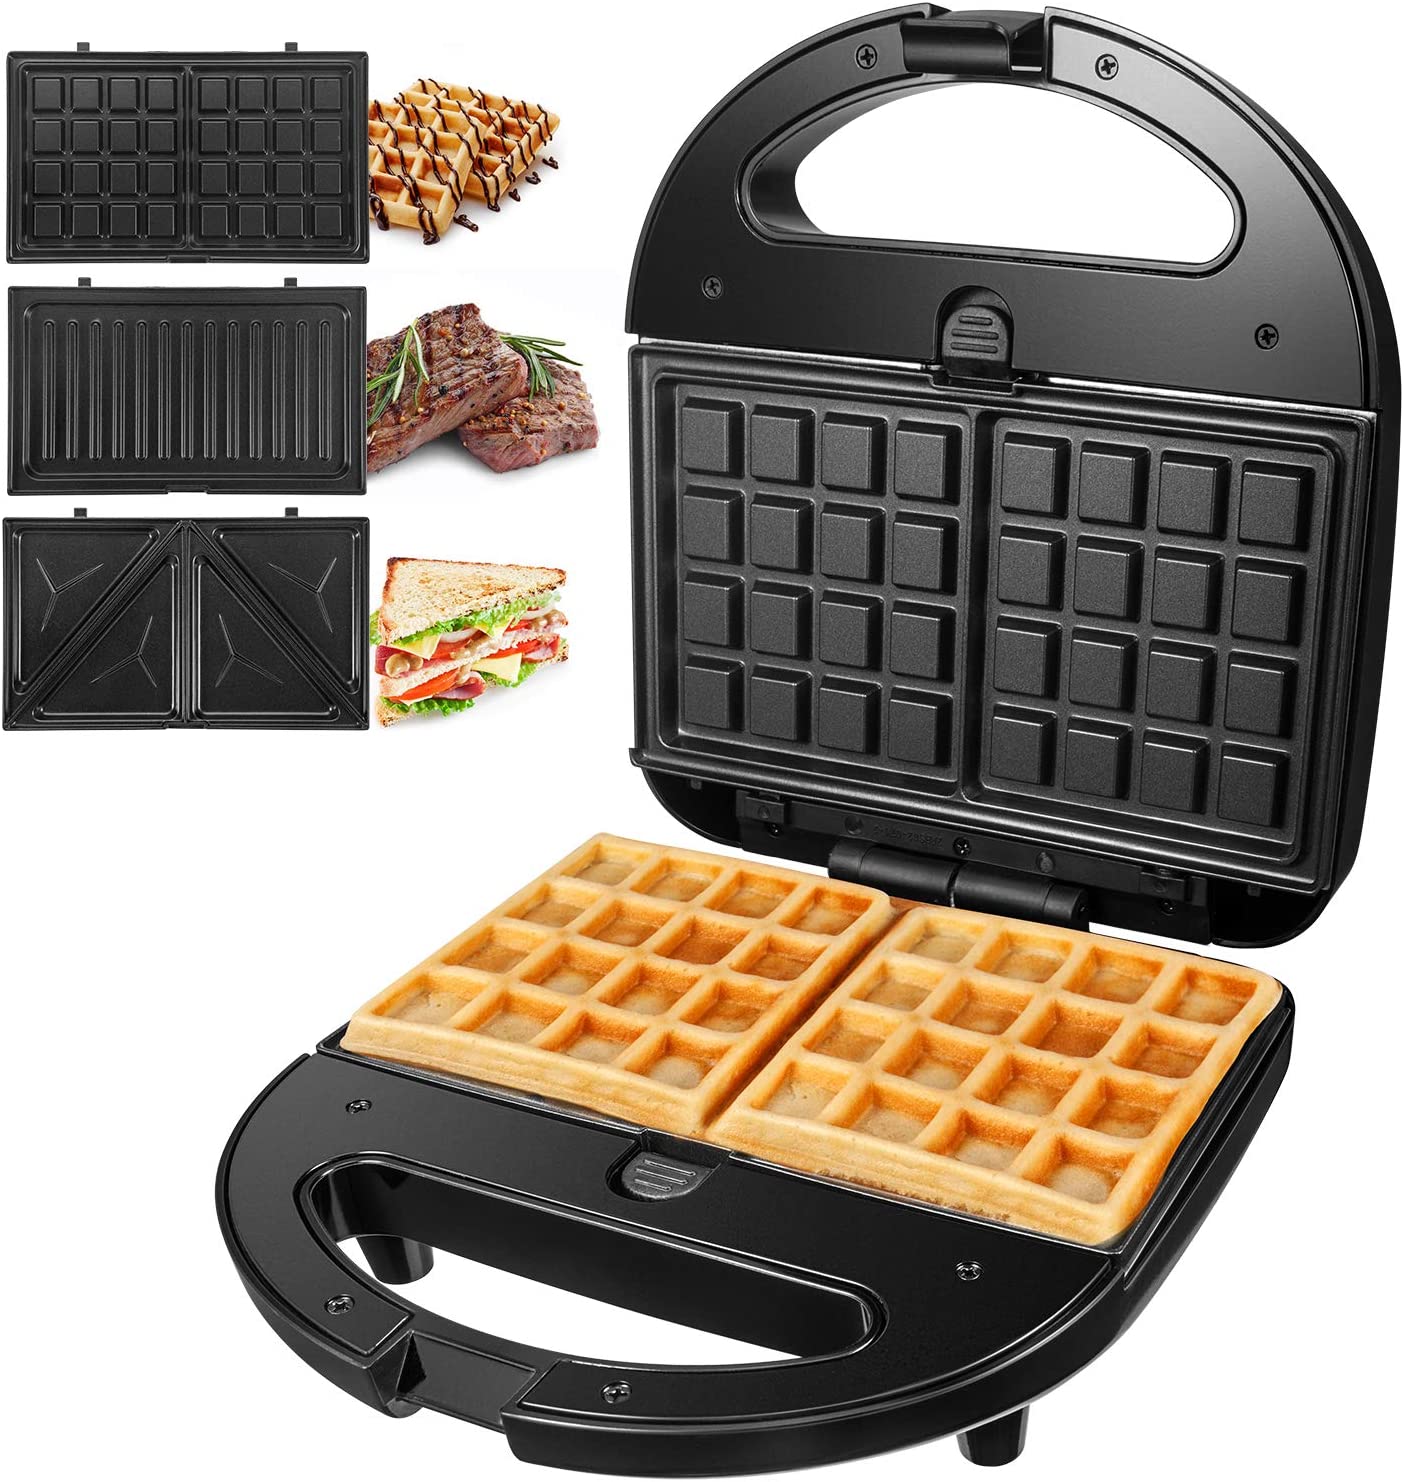 Sandwich Maker 3-in-1 (Sandwich Toaster, Contact Grill, Waffle Iron) DIDO, Non-Stick Coated Removable Plates, Cool Touch Handles, 750 W, LED Indicators, BPA Free, Black